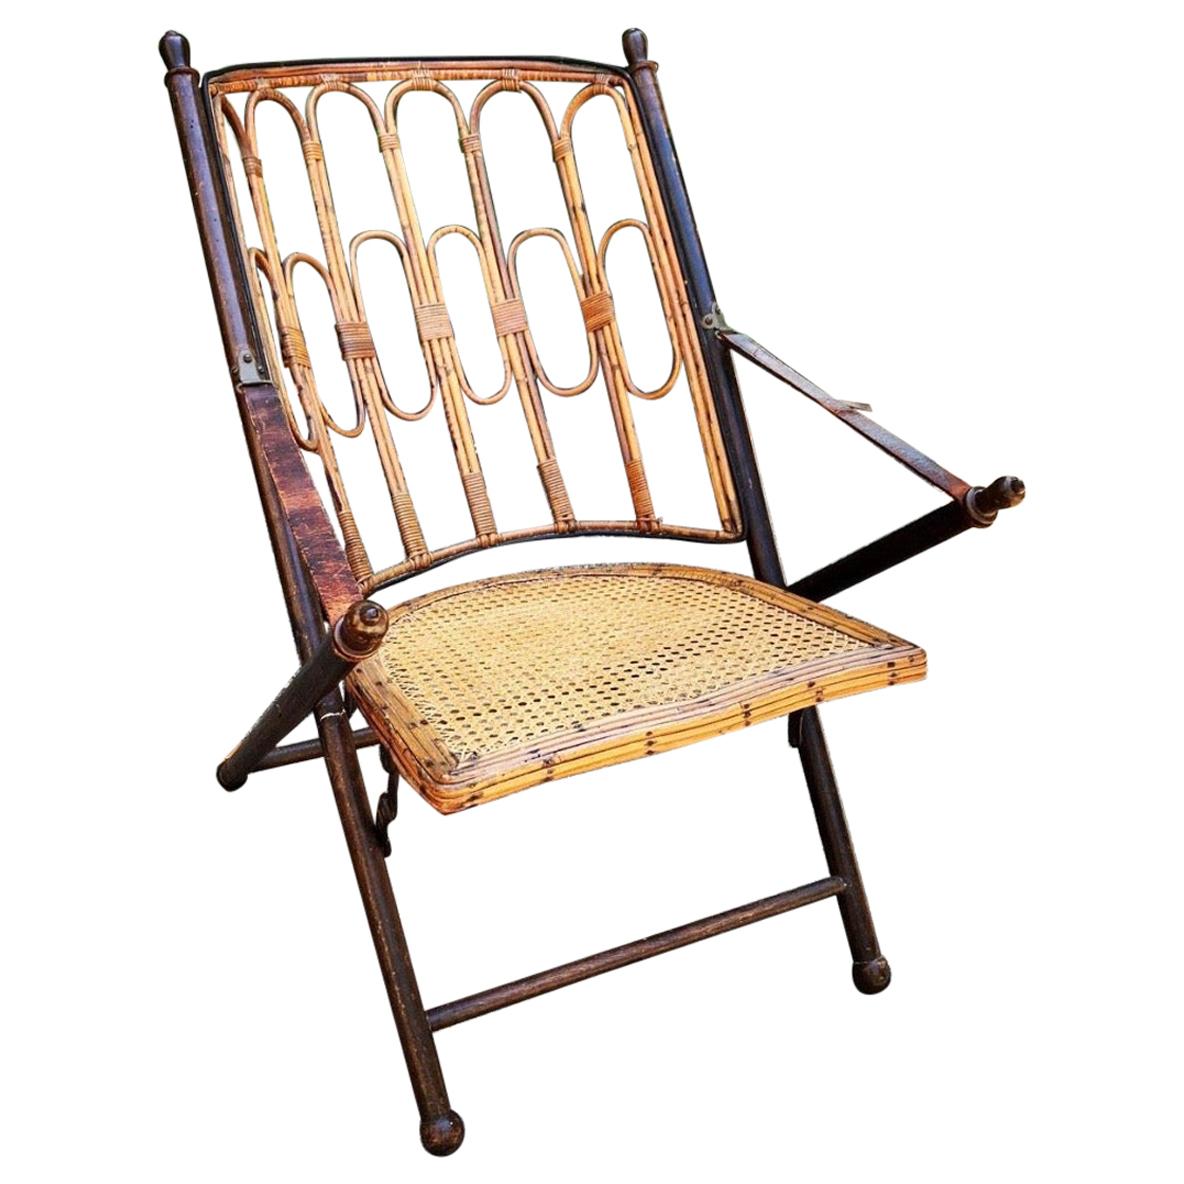 East Indies British Colonial Campaign Folding Chair, 19th Century